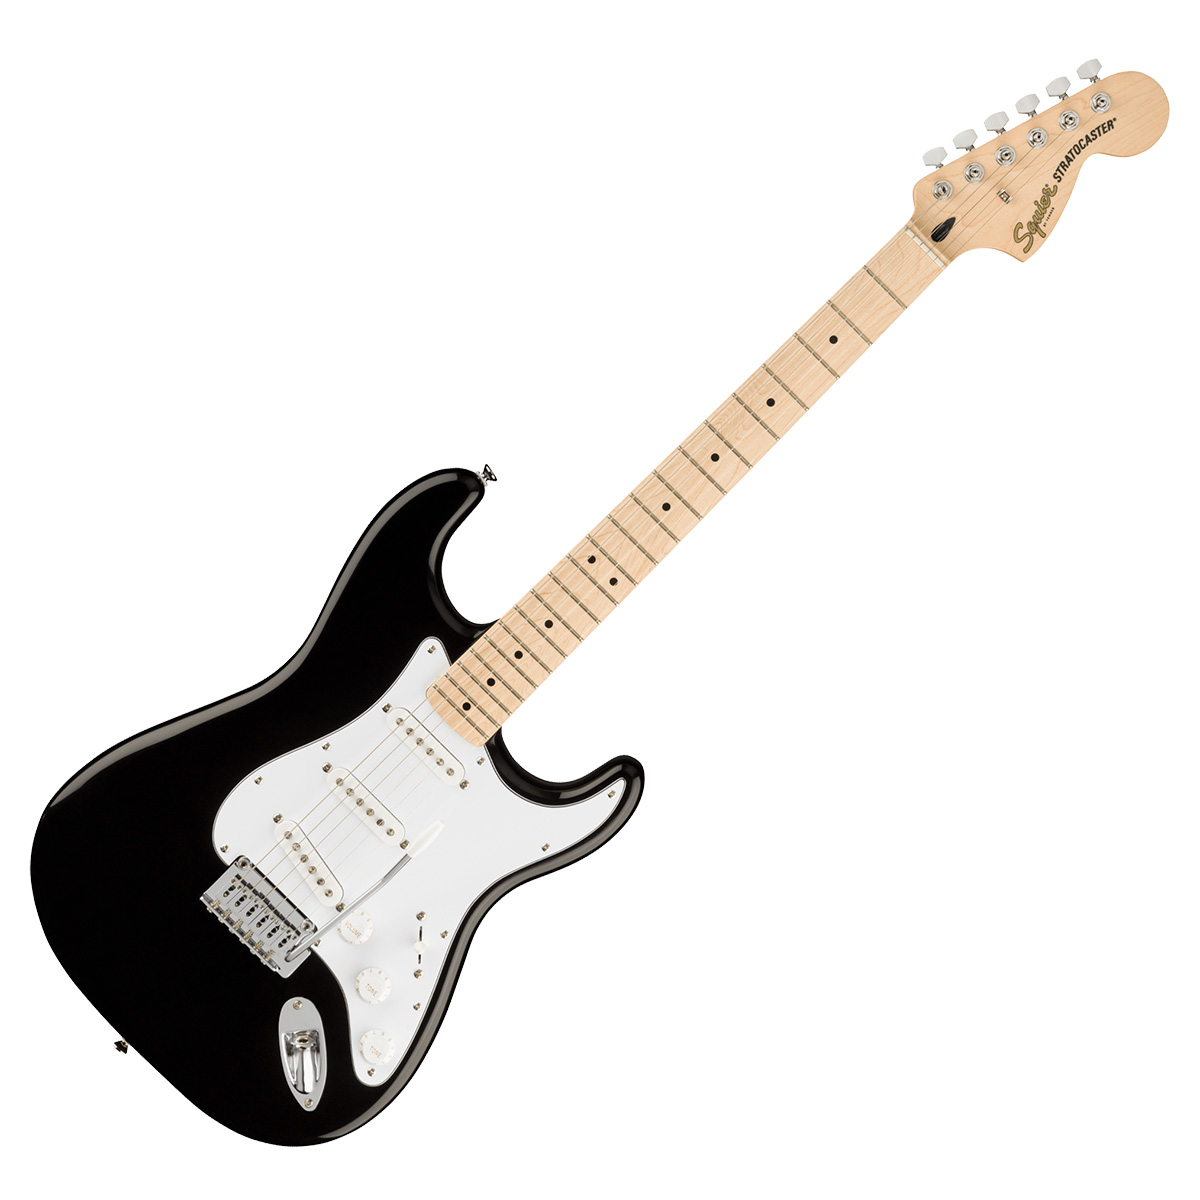 Squier by Fender Affinity Series Stratocaster Maple Fingerboard White  Pickguard エレキギター ストラトキャスター スクワイヤー / スクワイア 【 イオンモール鹿児島店】